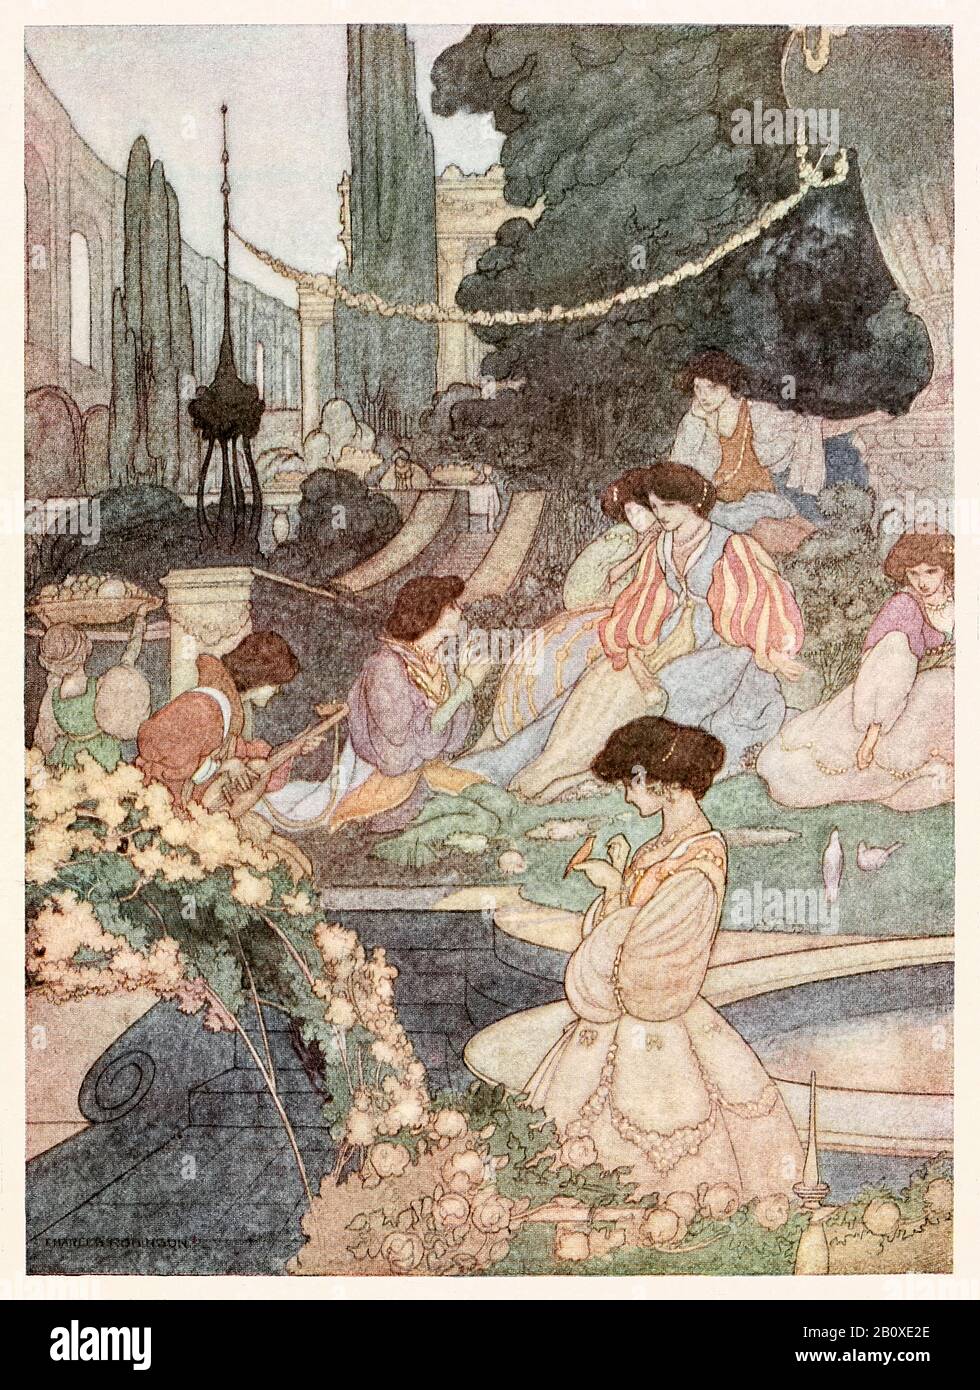 “The palace of Sans-Souci” from The Happy Prince and Other Tales by Oscar Wilde (1854-1900) illustrated by Charles Robinson (1870-1937). See more information below. Stock Photo